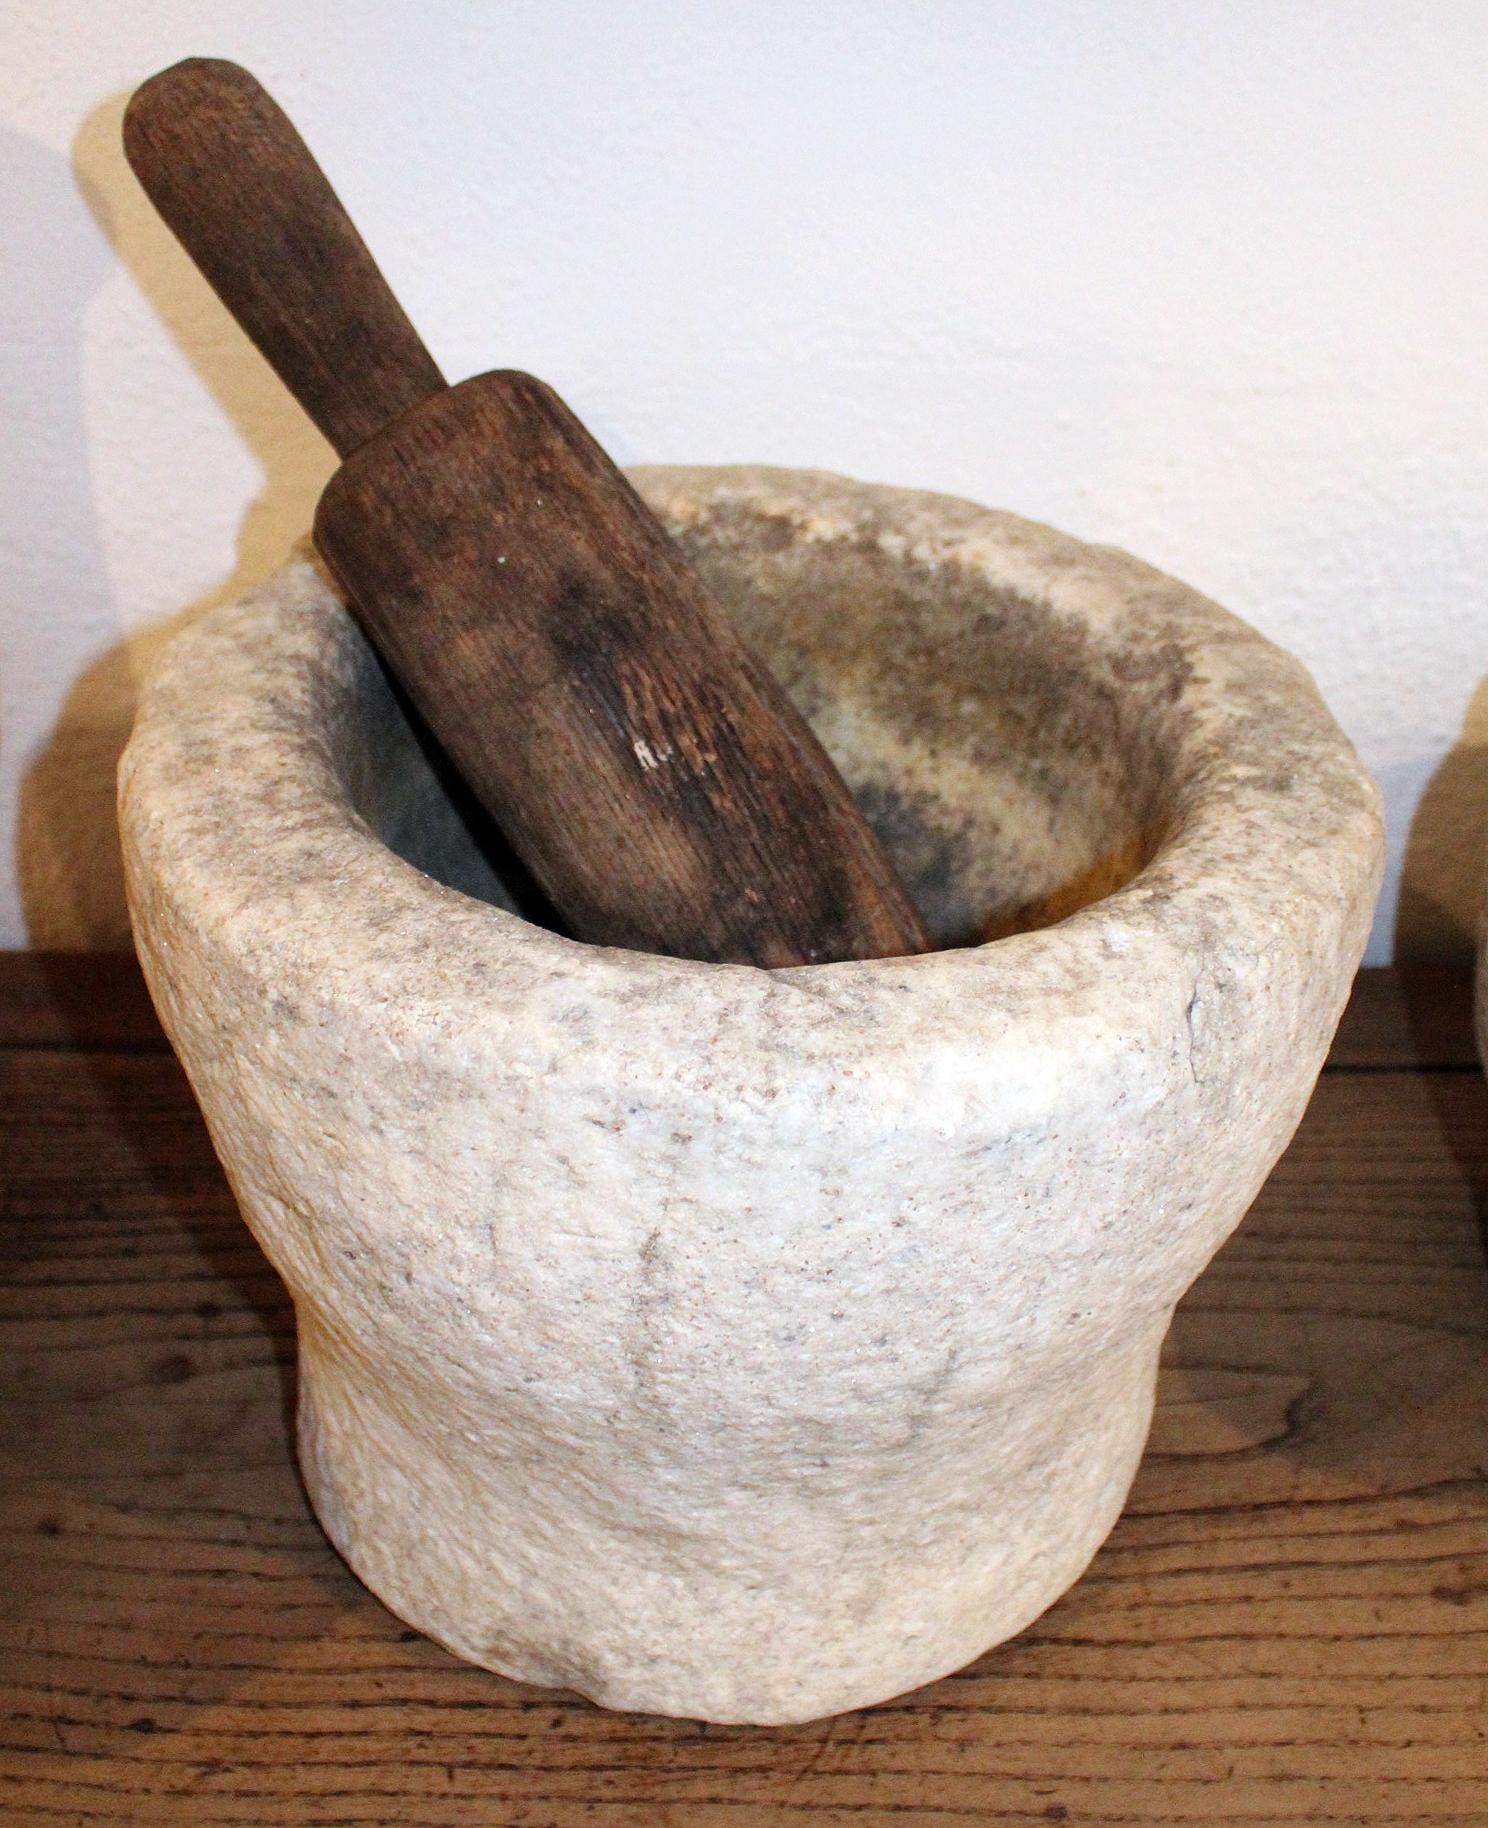 18th century Spanish hand carved stone kitchen mortar and wooden pestle, used in kitchens and pharmacies to prepare herbs for cooking or healing.

